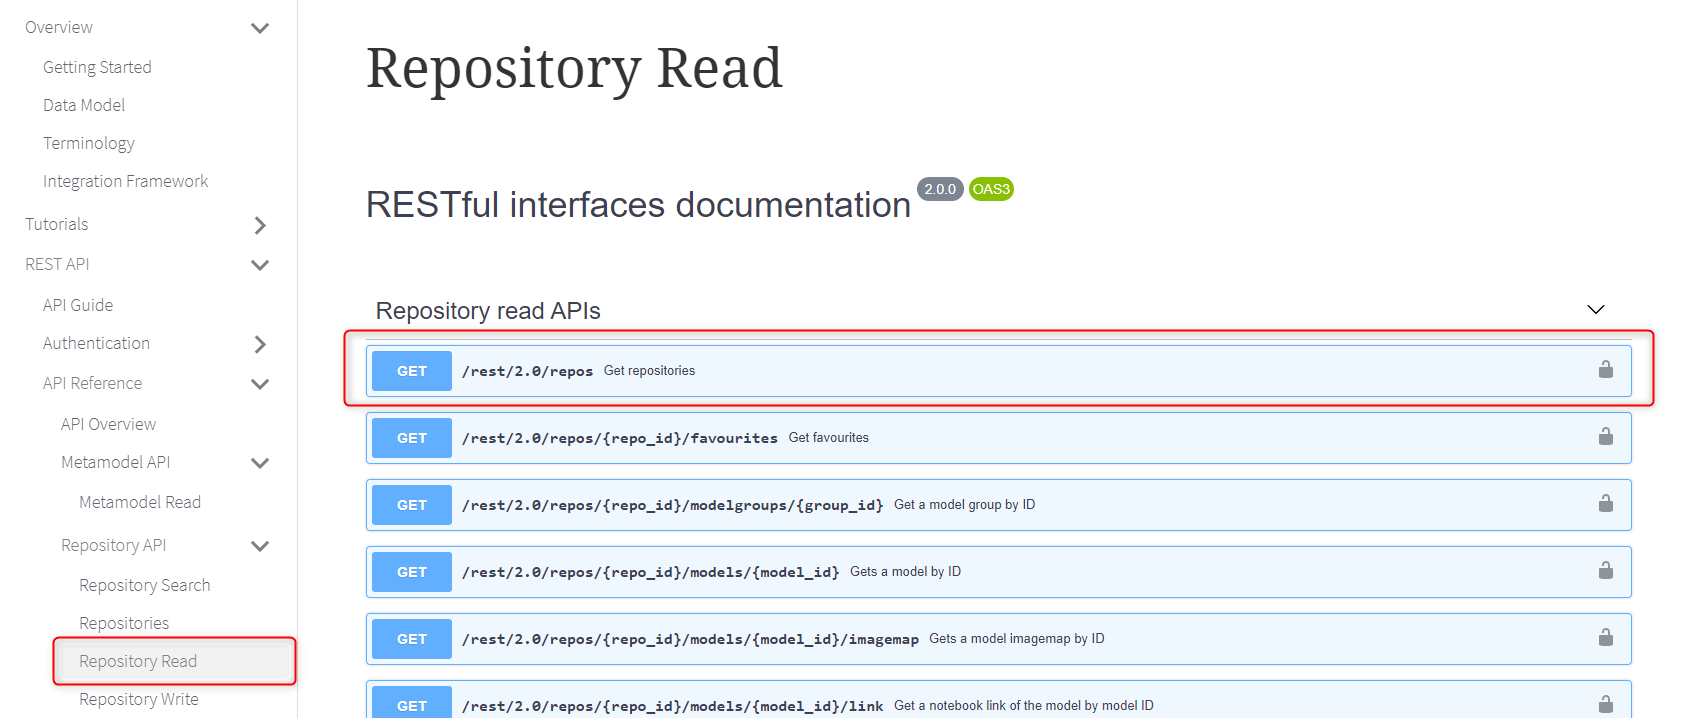 Repository Read endpoint